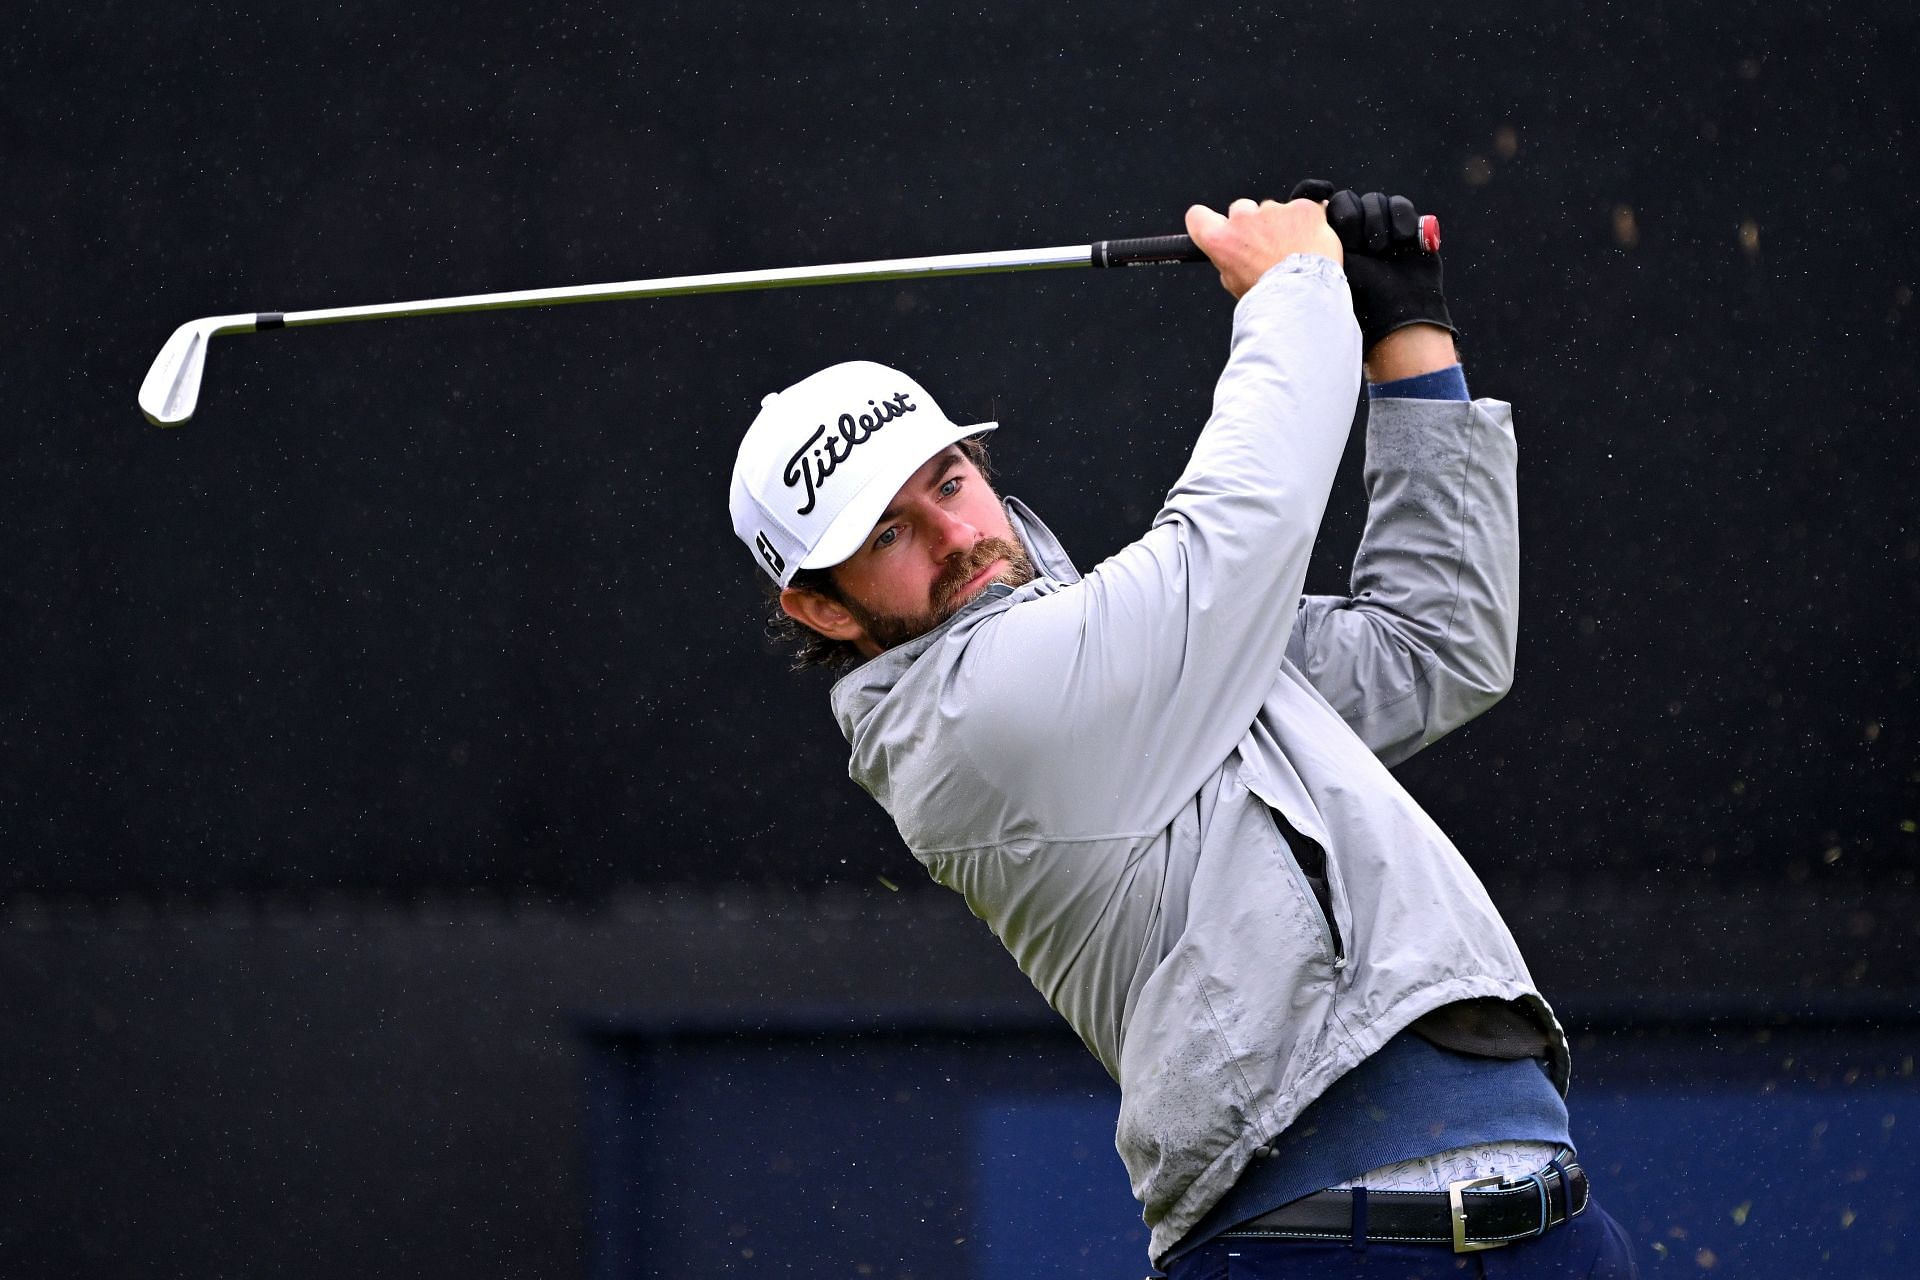 Cameron Young is the highest-ranked golfer playing at the 3M Open